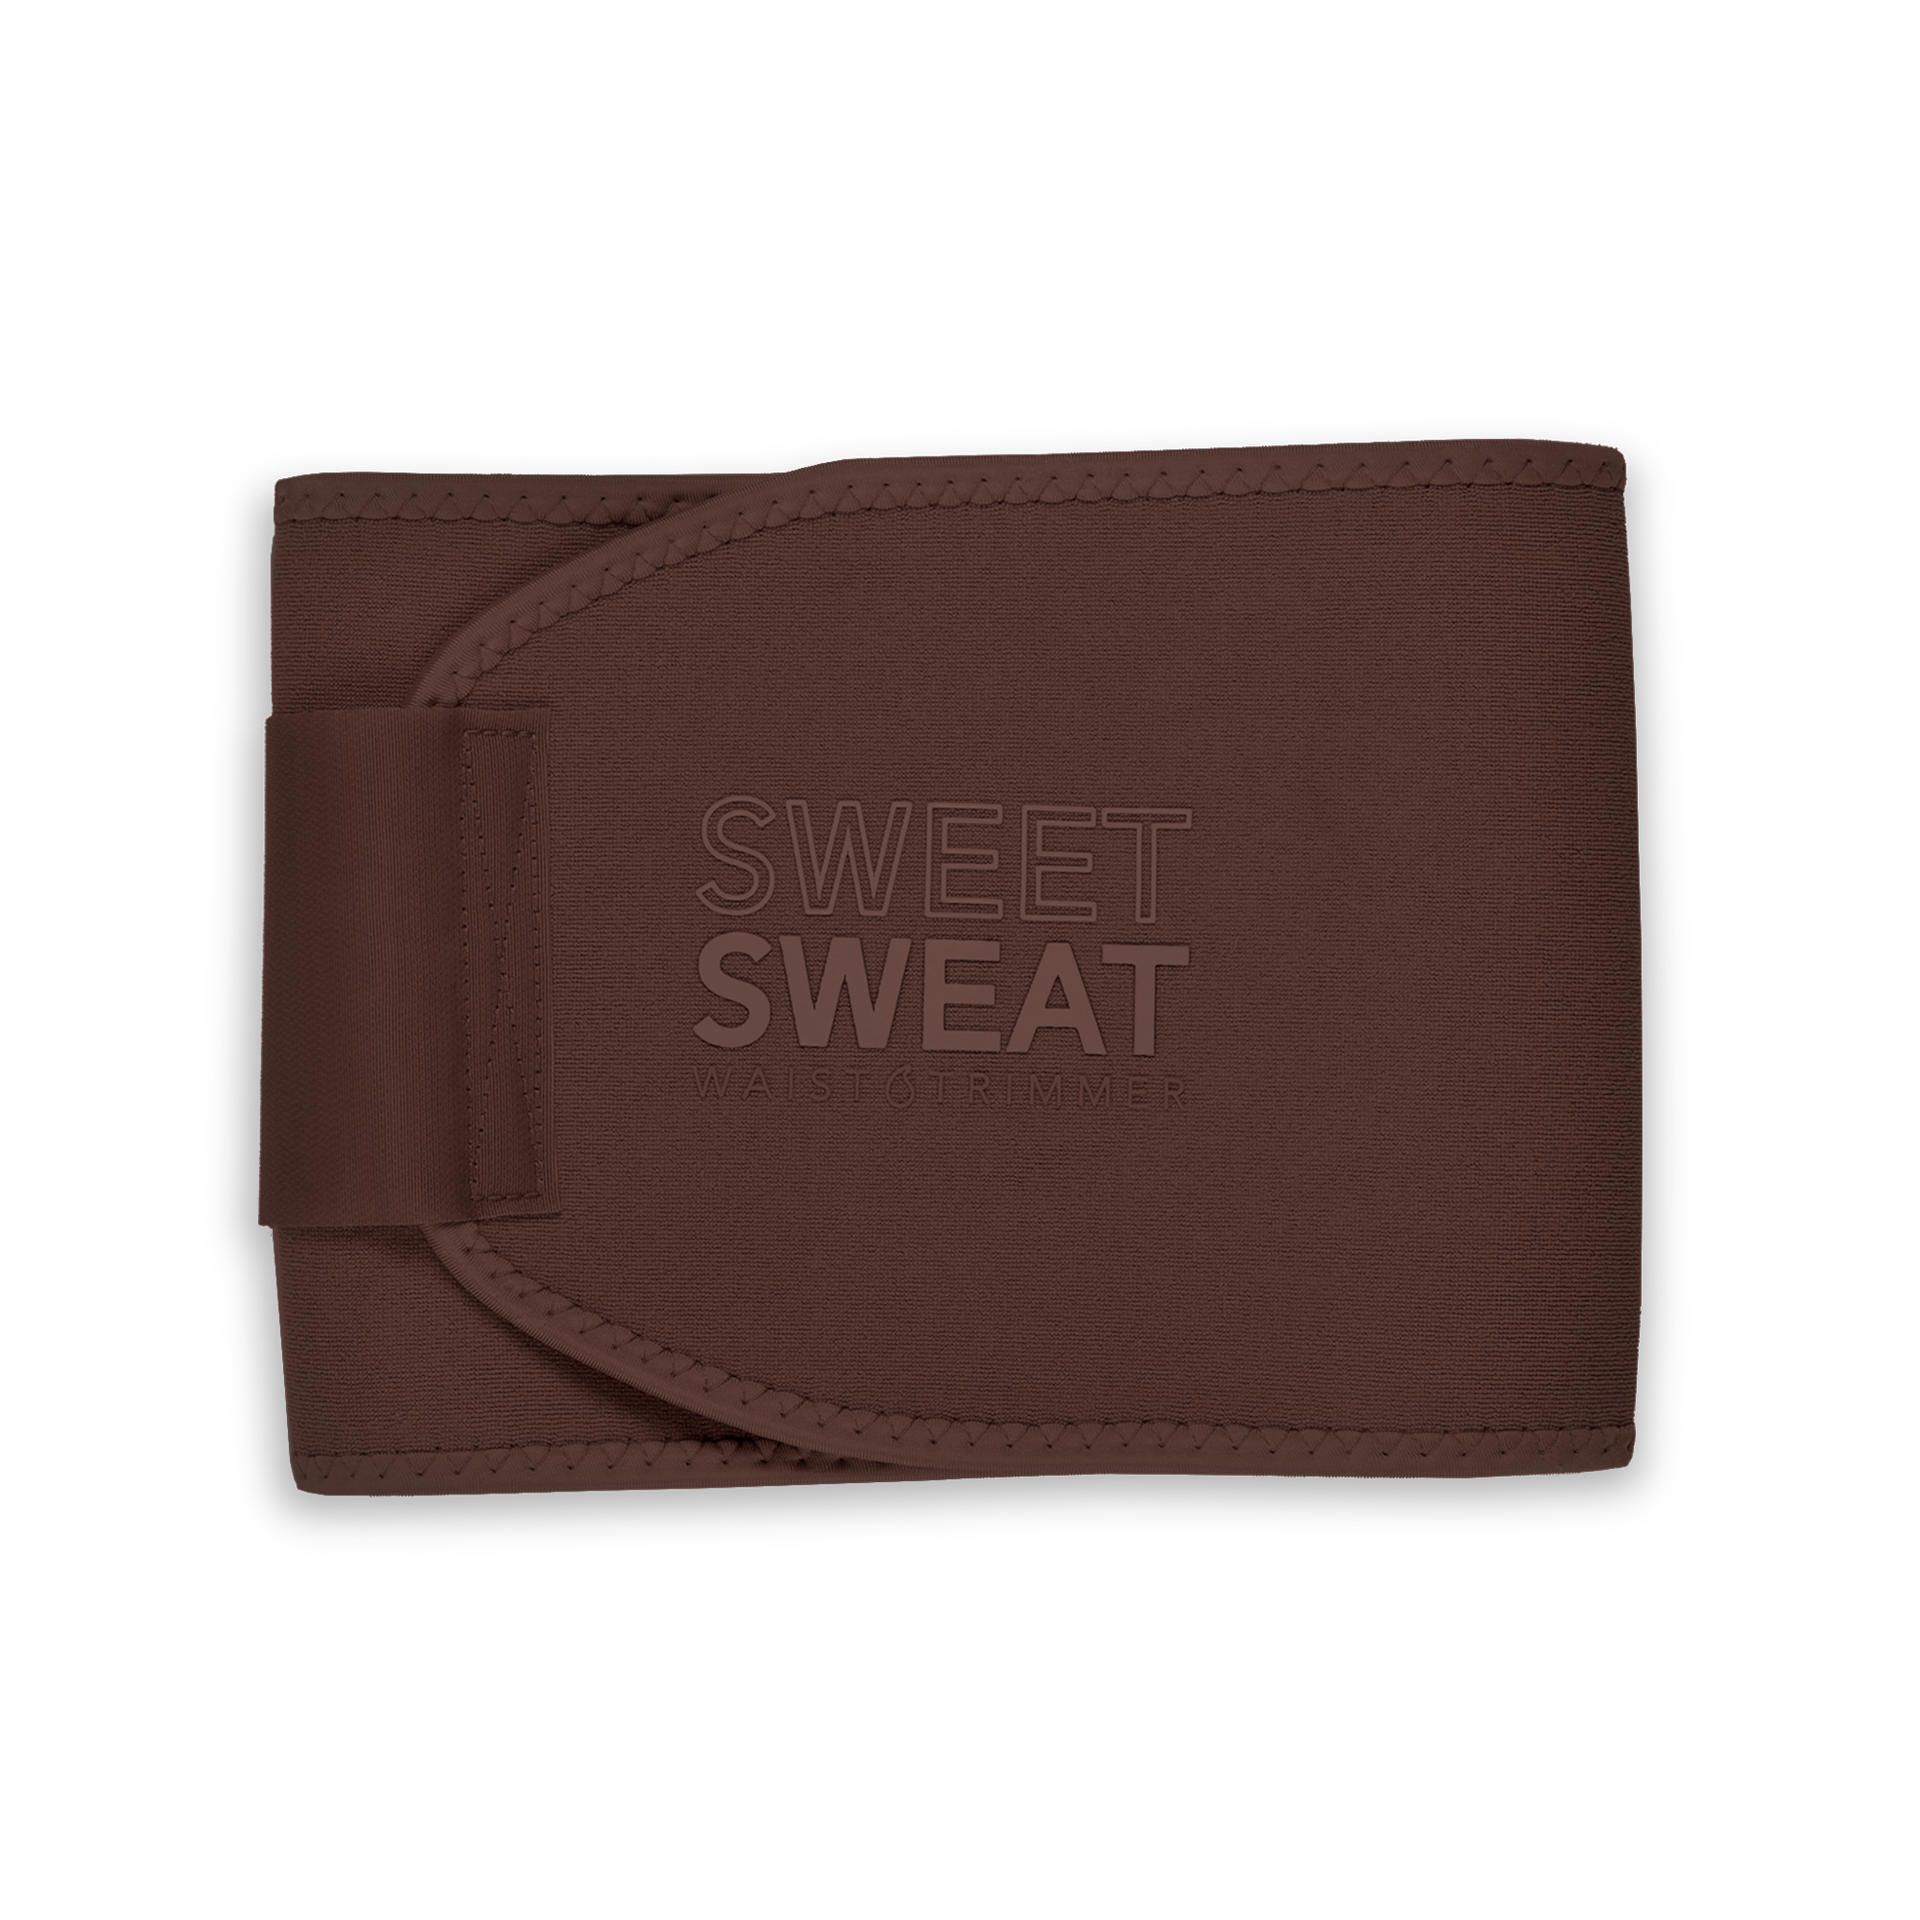 Sweet Sweat, Other, Sweet Sweat Waist Trimmer By Sports Research Sweat  Band Size Small New